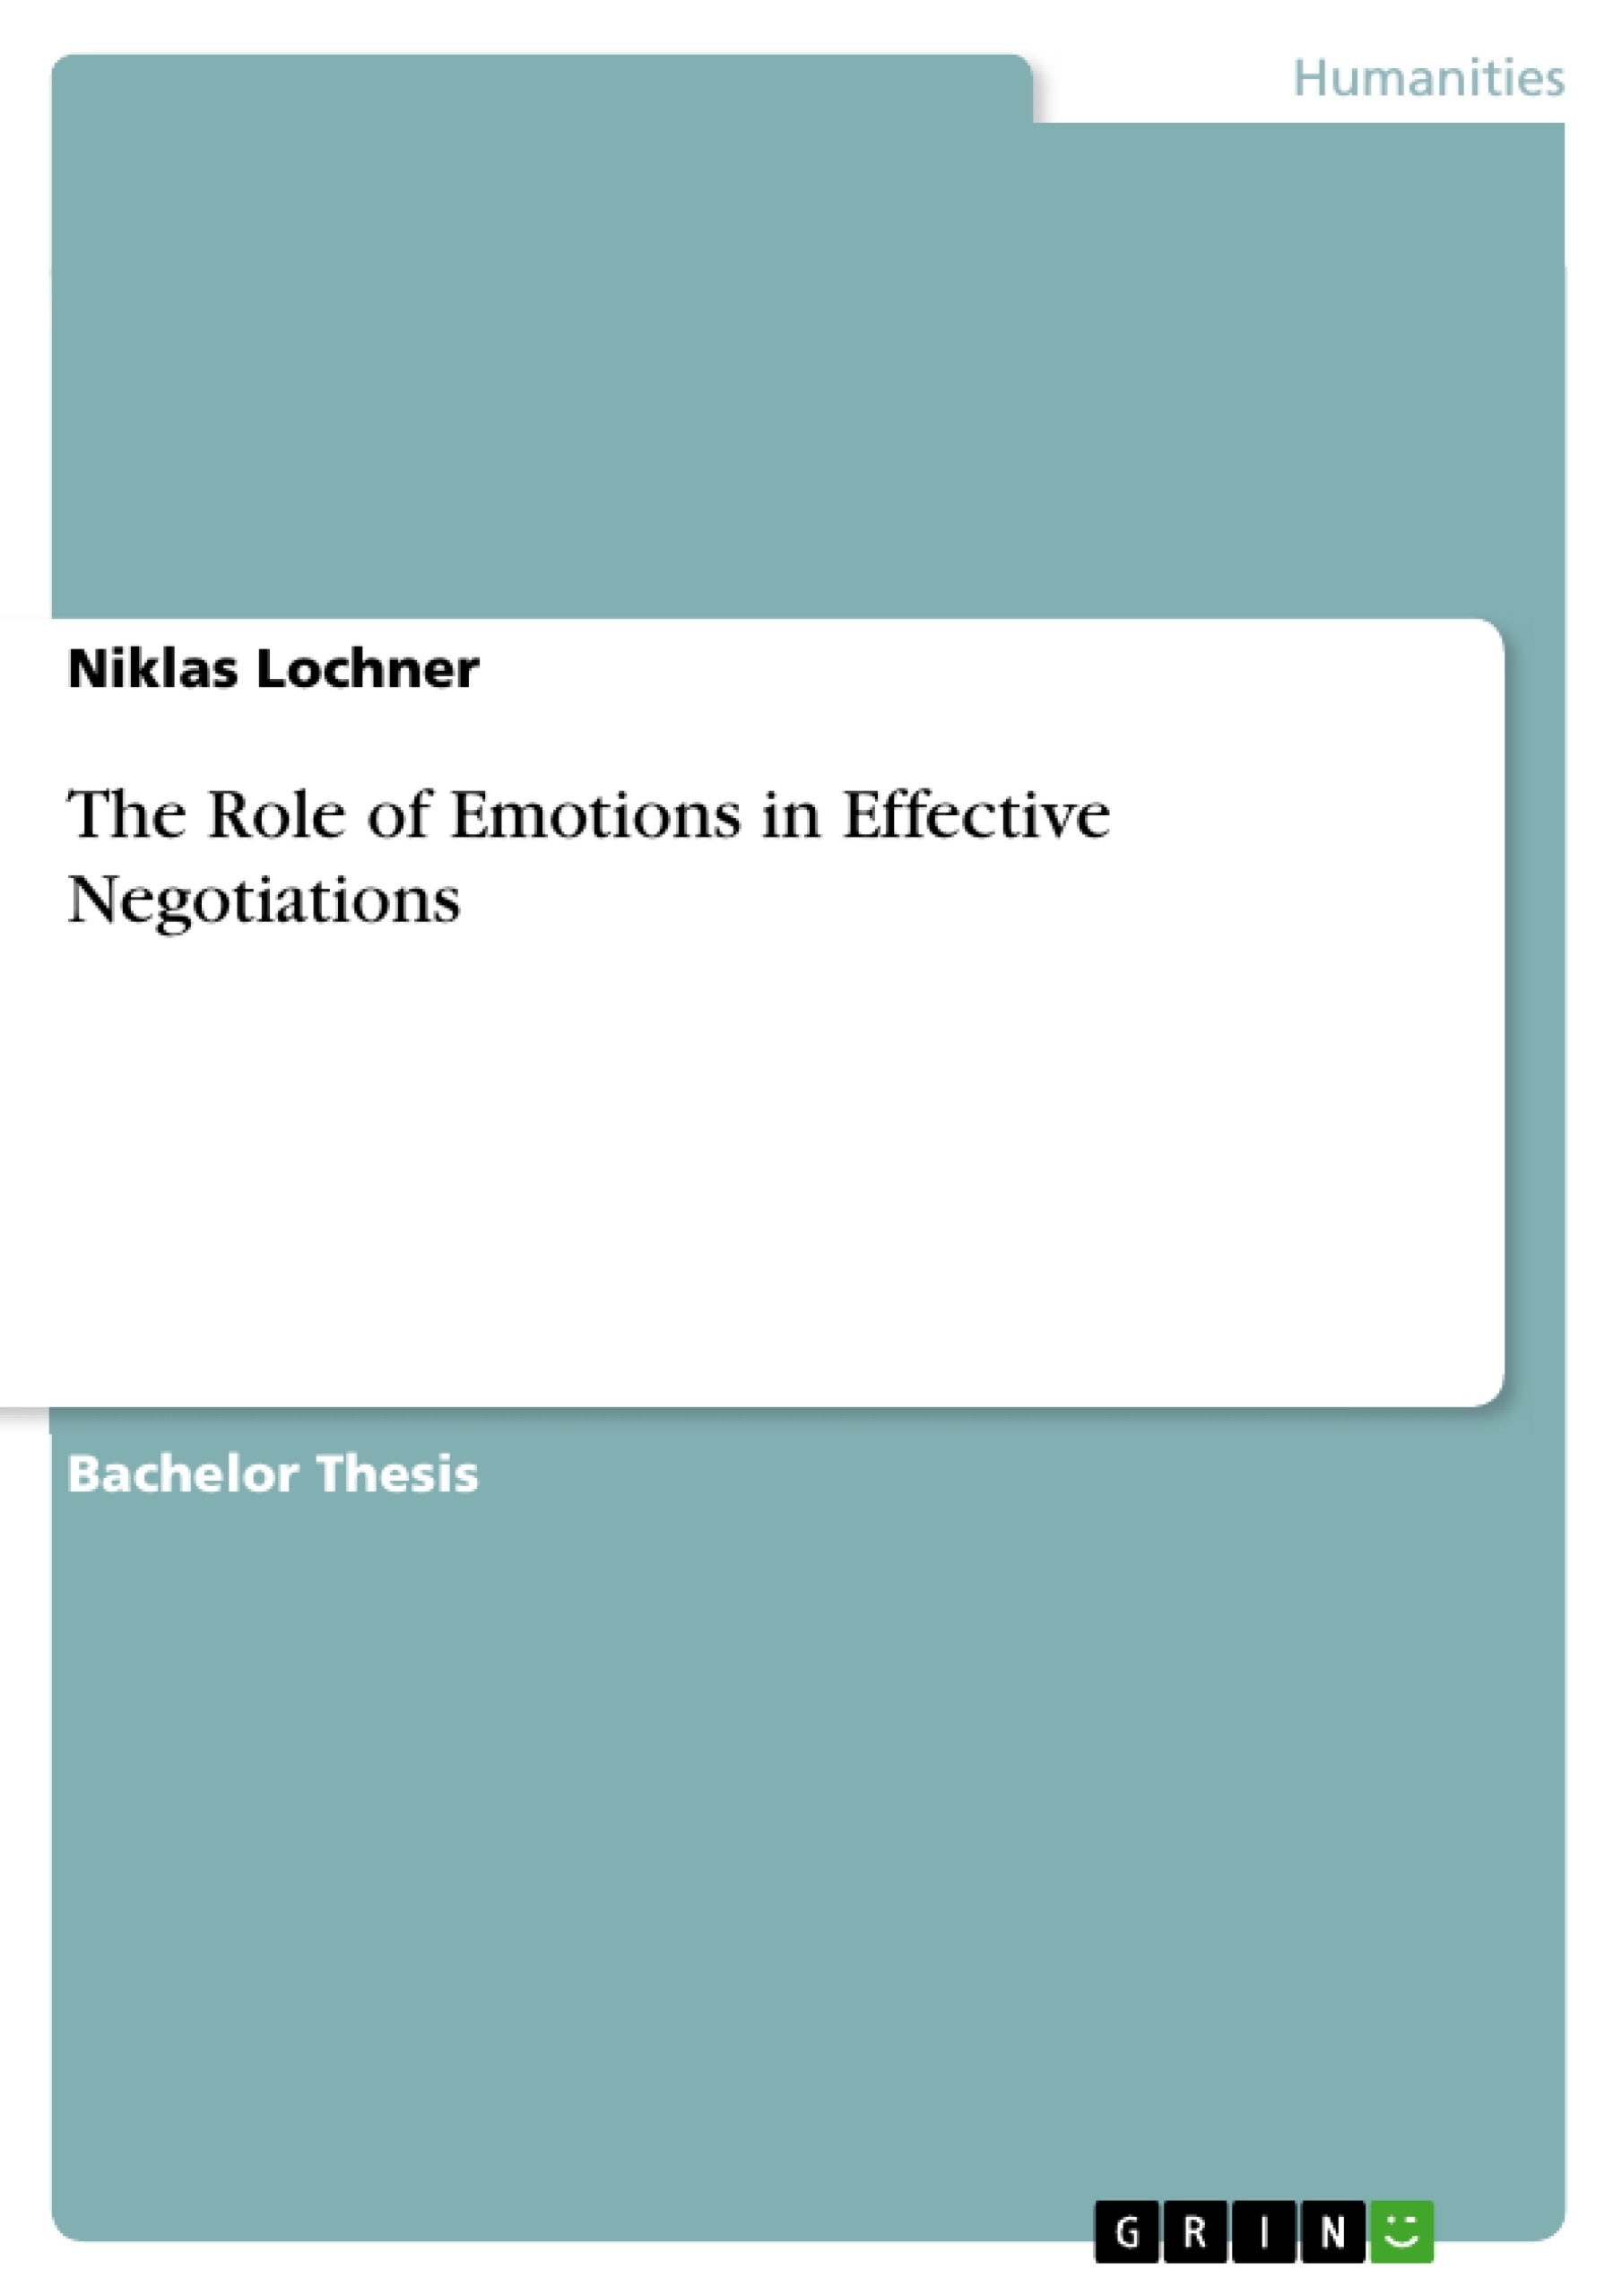 Title: The Role of Emotions in Effective Negotiations